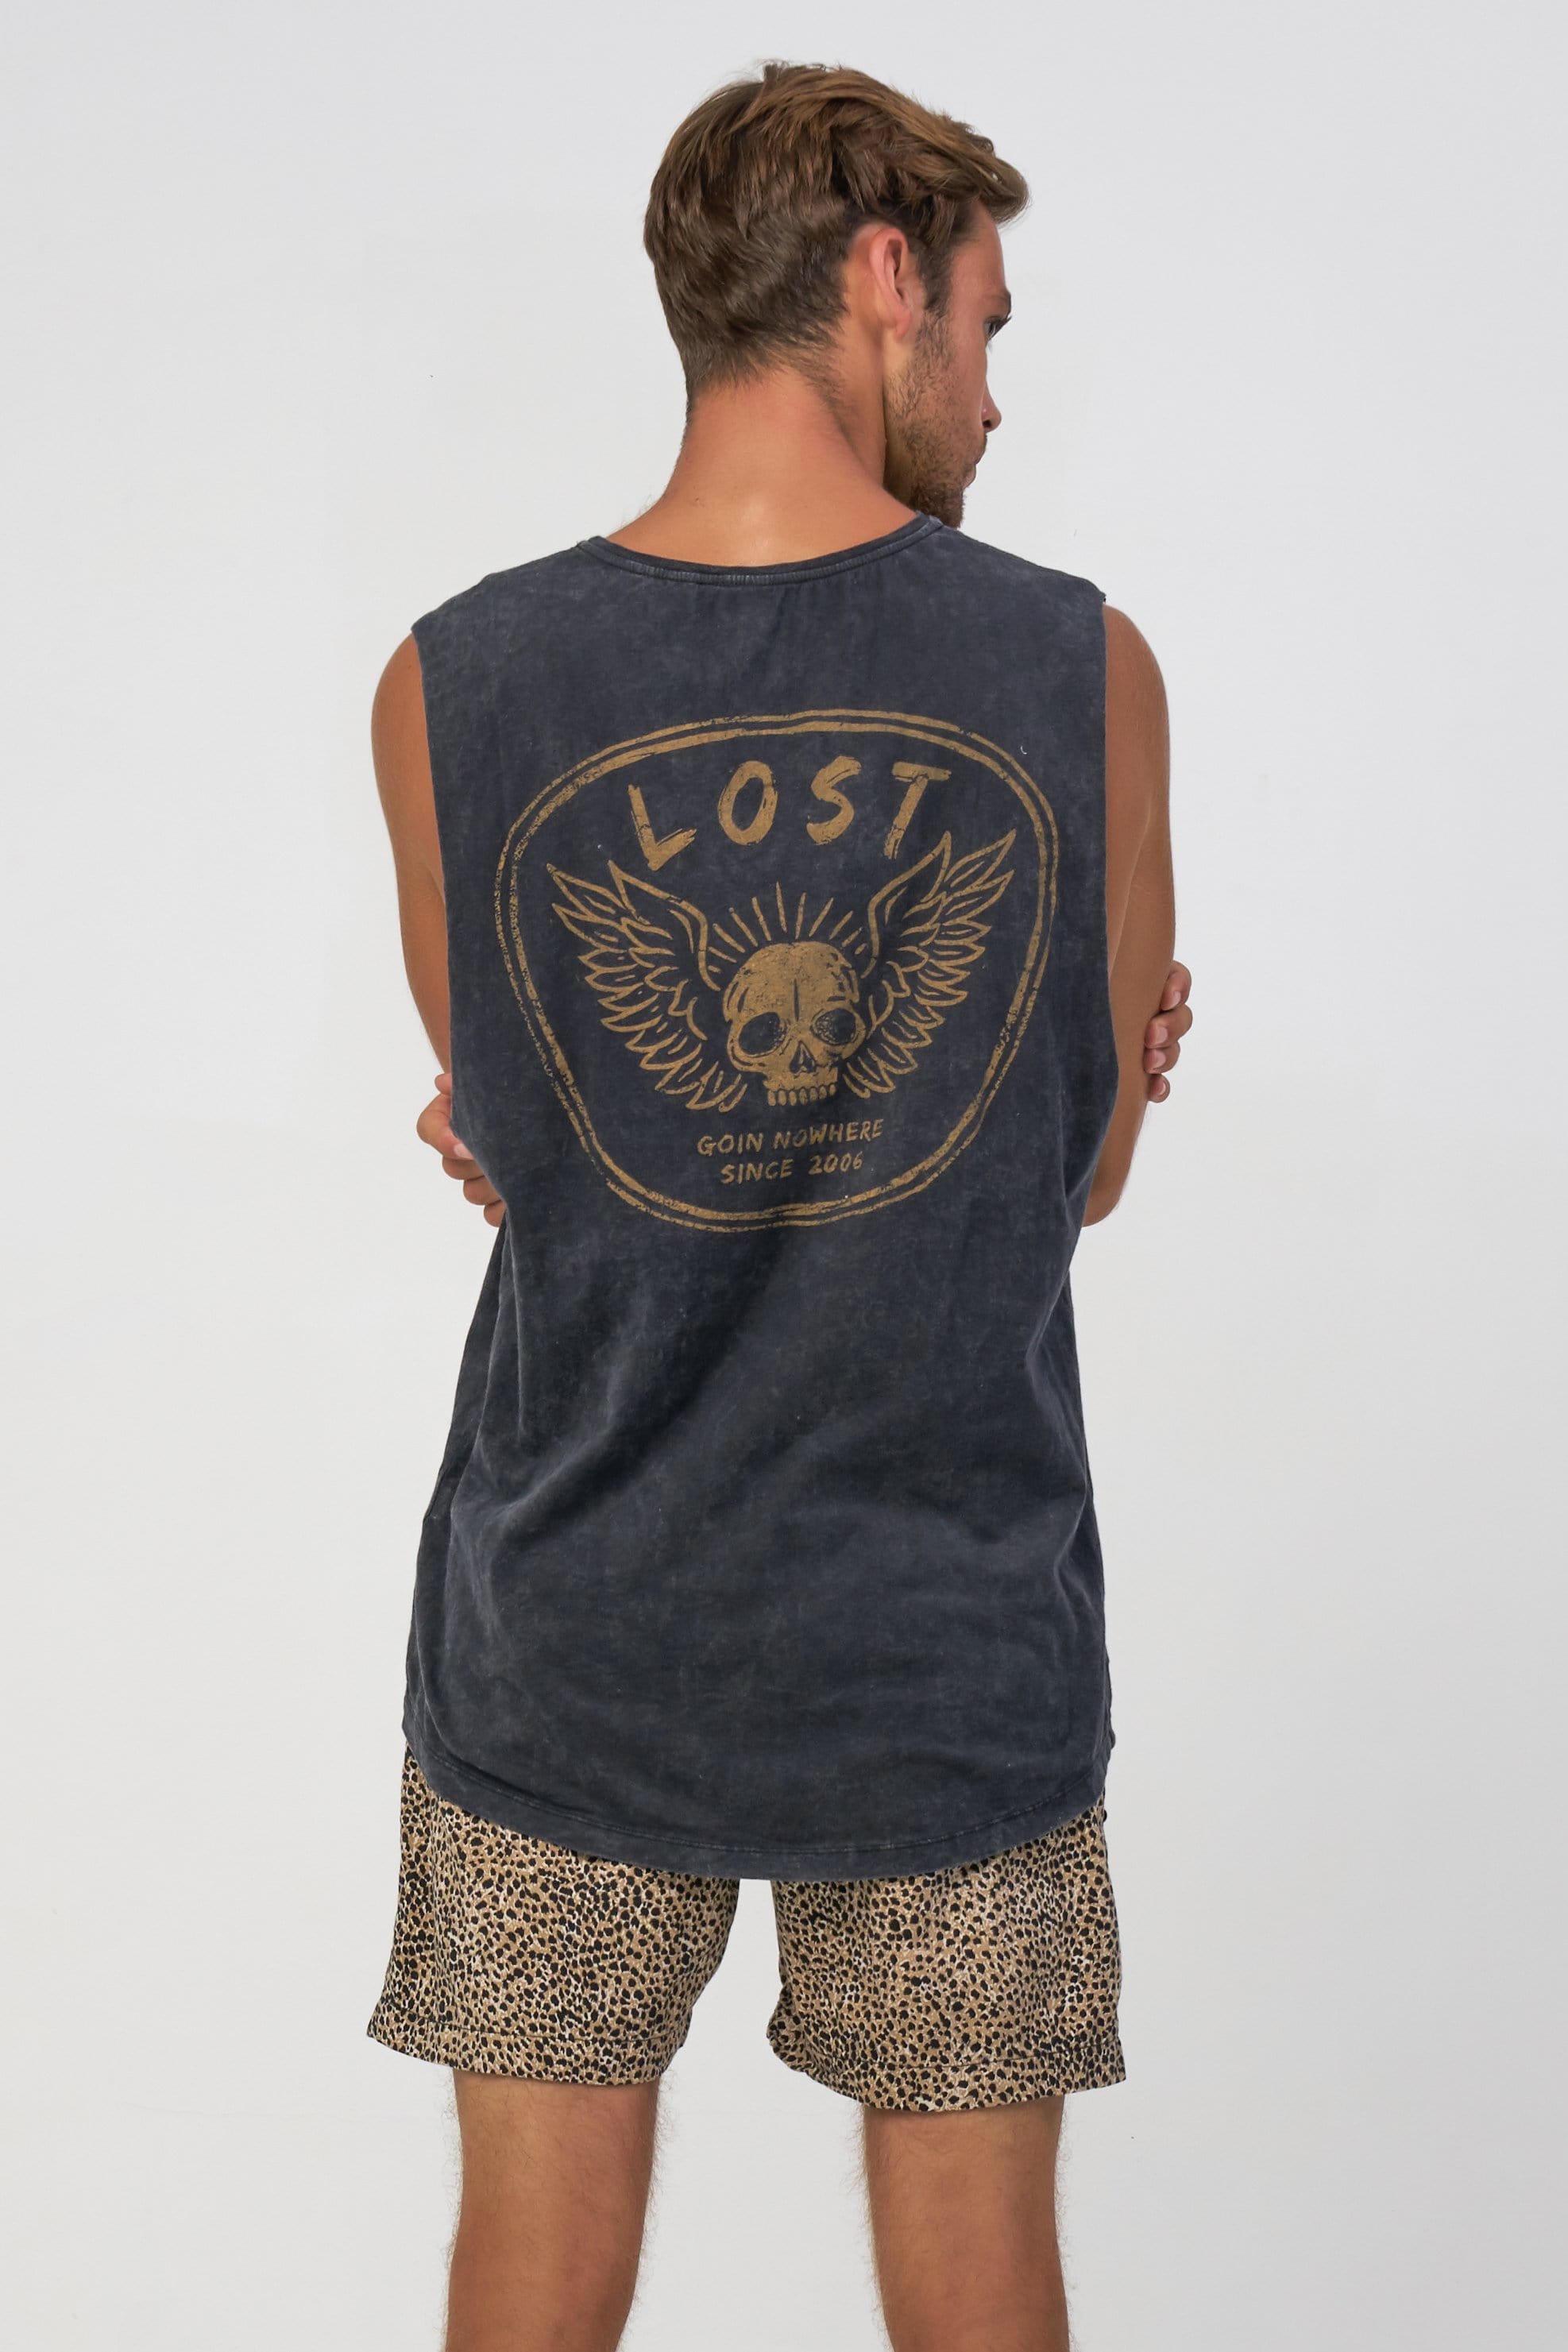 Sm Goin Nowhere - Mens Muscle Tank - LOST IN PARADISE